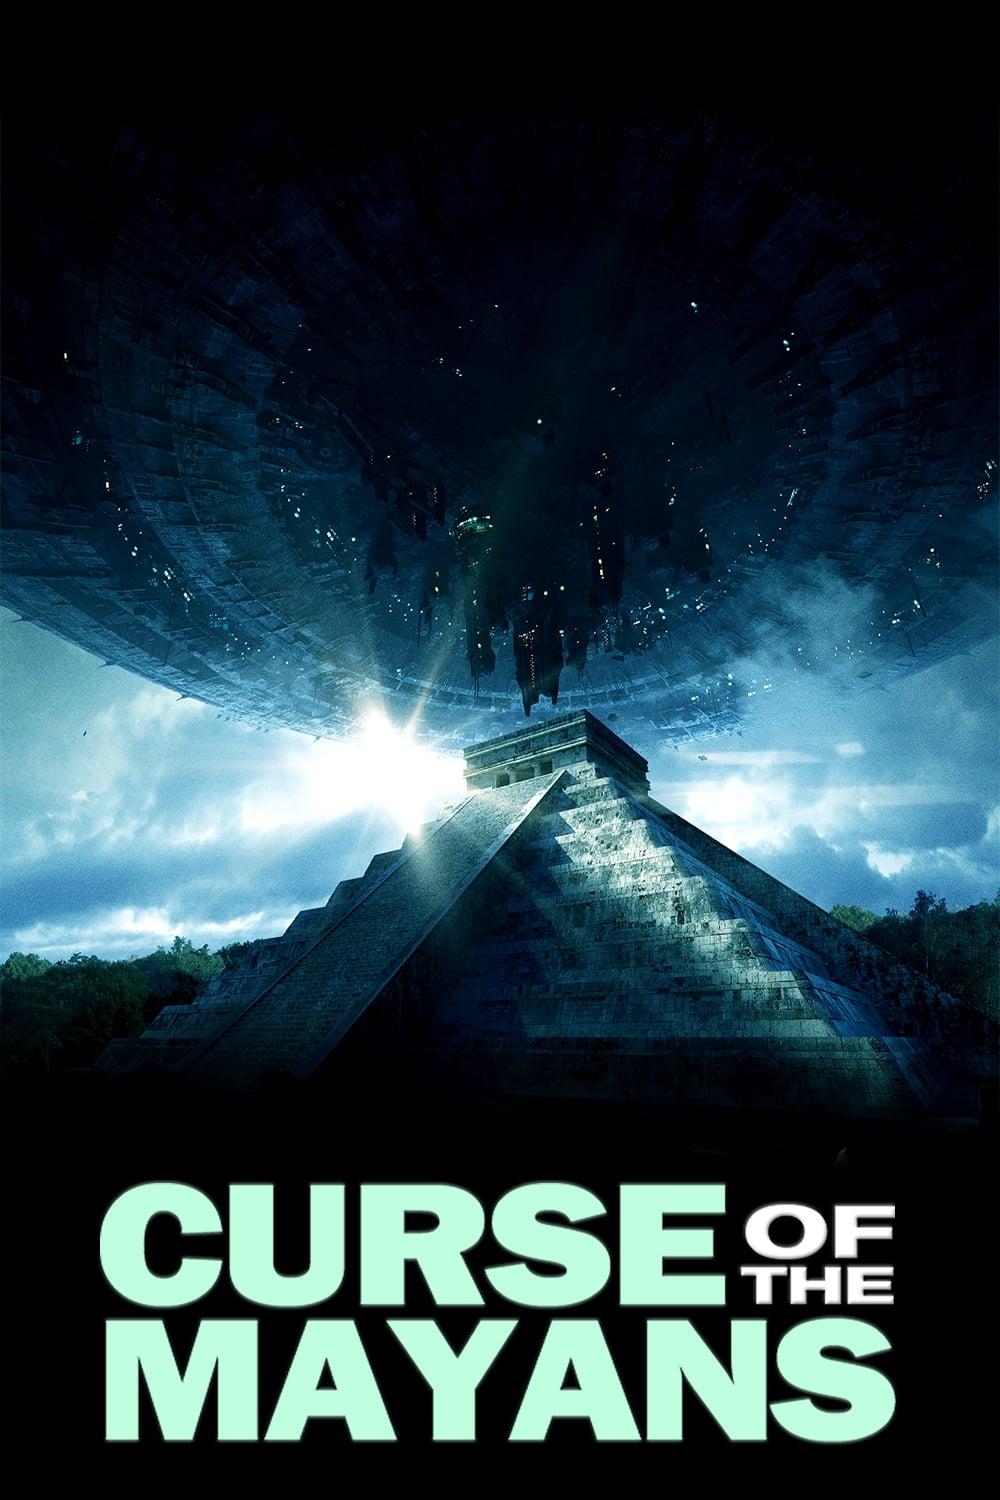 Curse of the Mayans poster